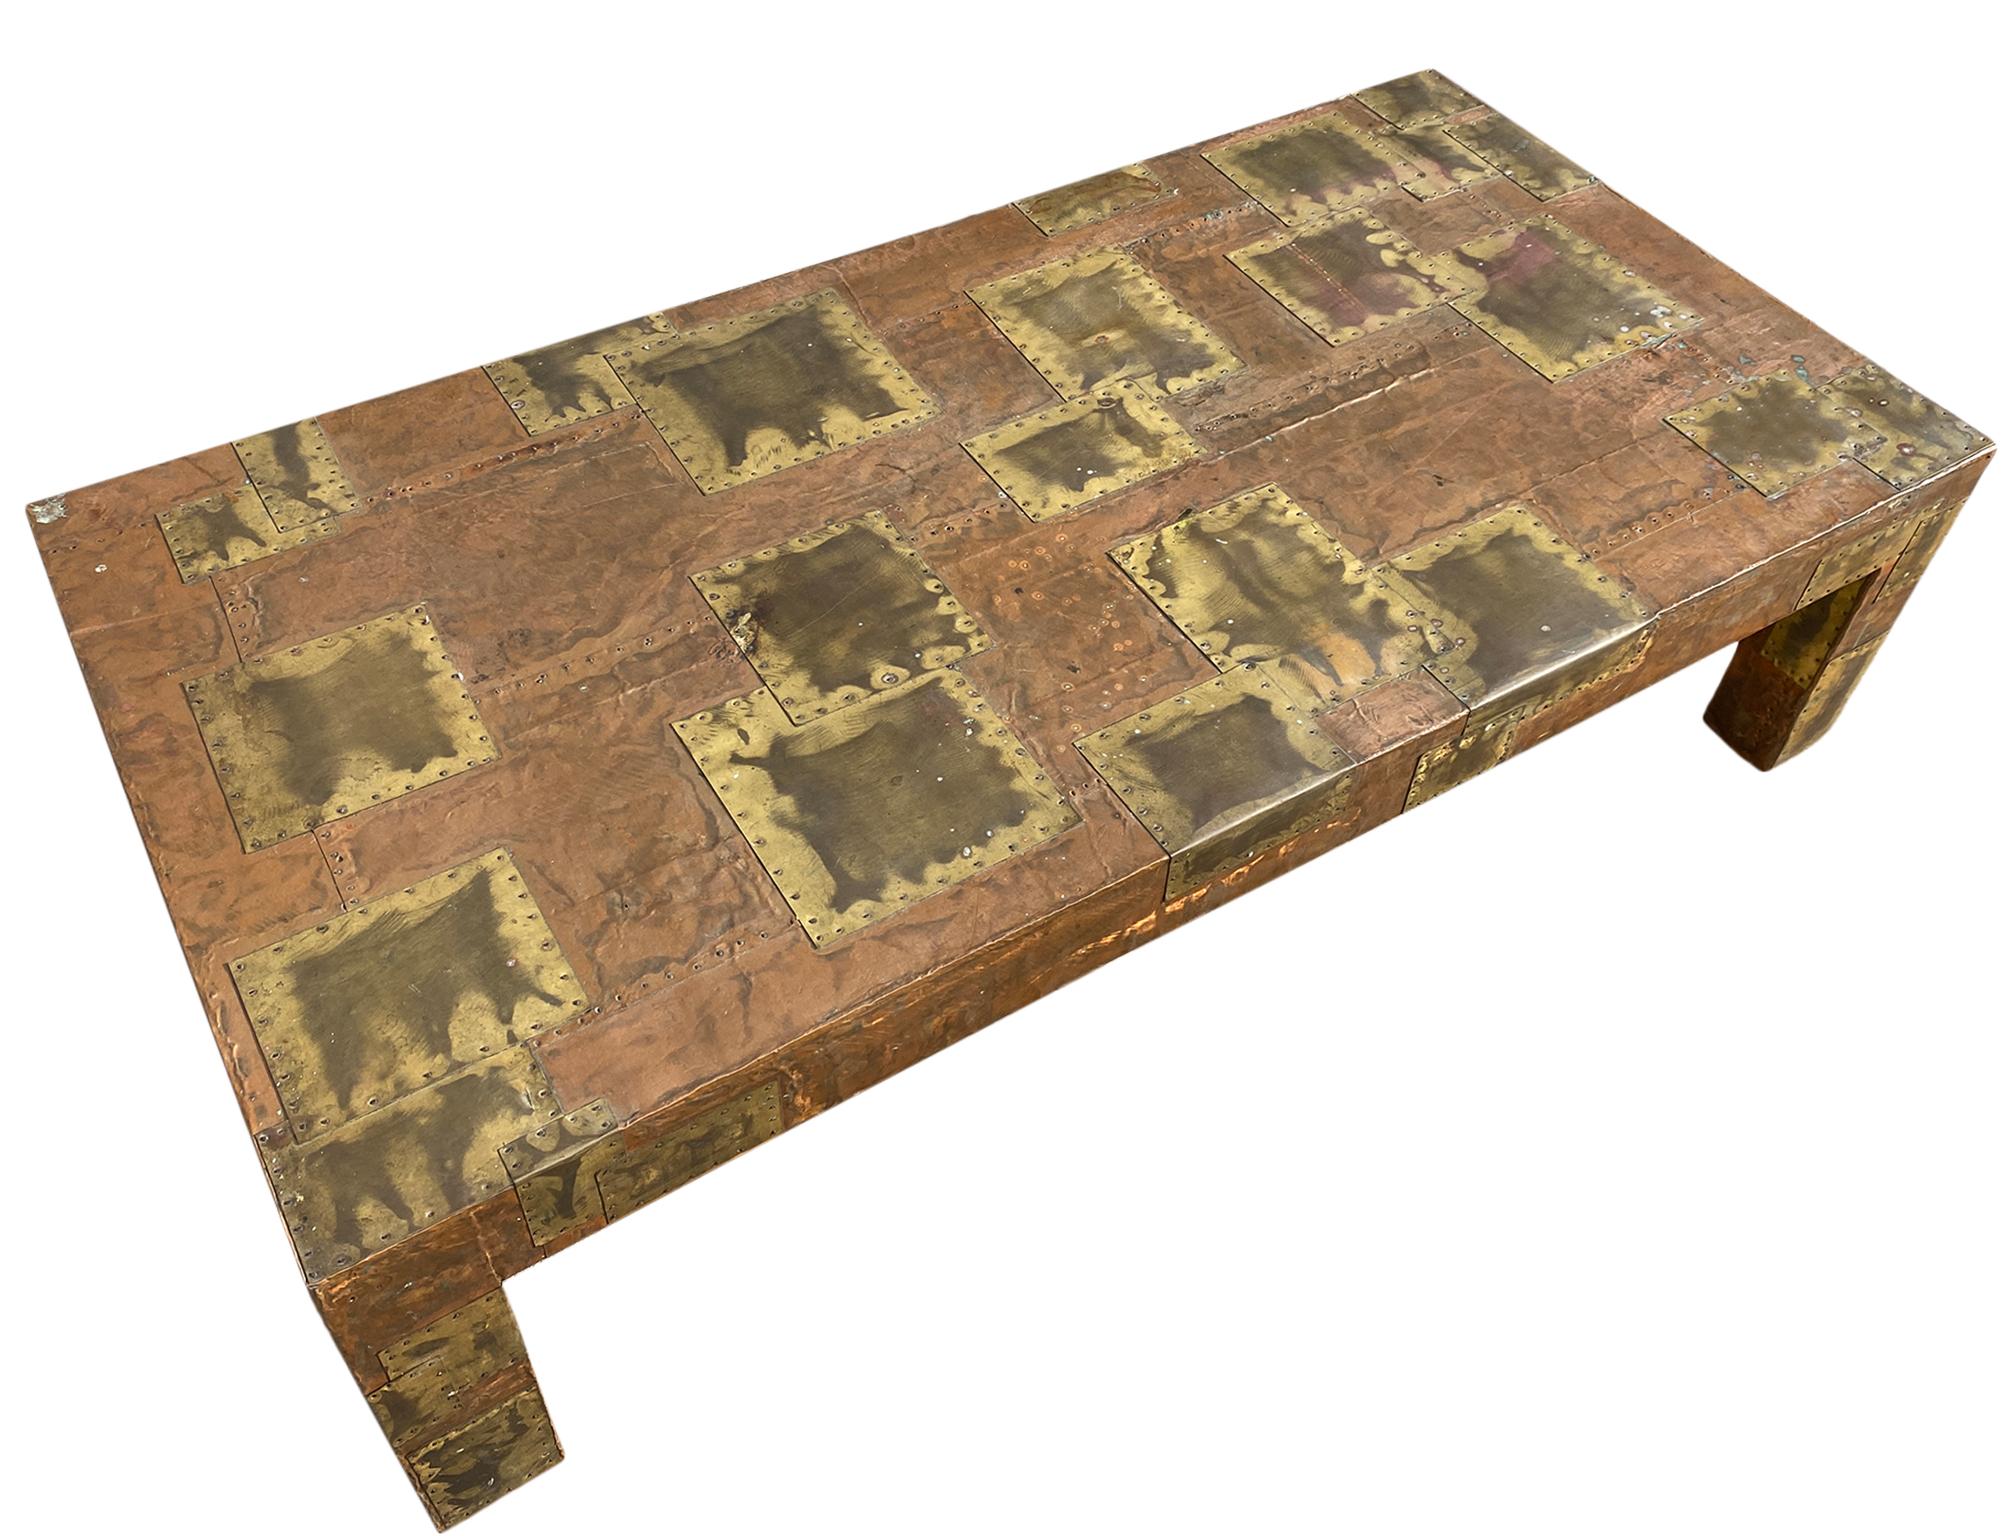 Midcentury Brutalist patchwork coffee table style of Paul Evans. Wood structure with brass and copper sheets nailed down. Lots of patina and oxidation. Aged beautifully. No Label no Tag. very heavy and sturdy. Legs are 4